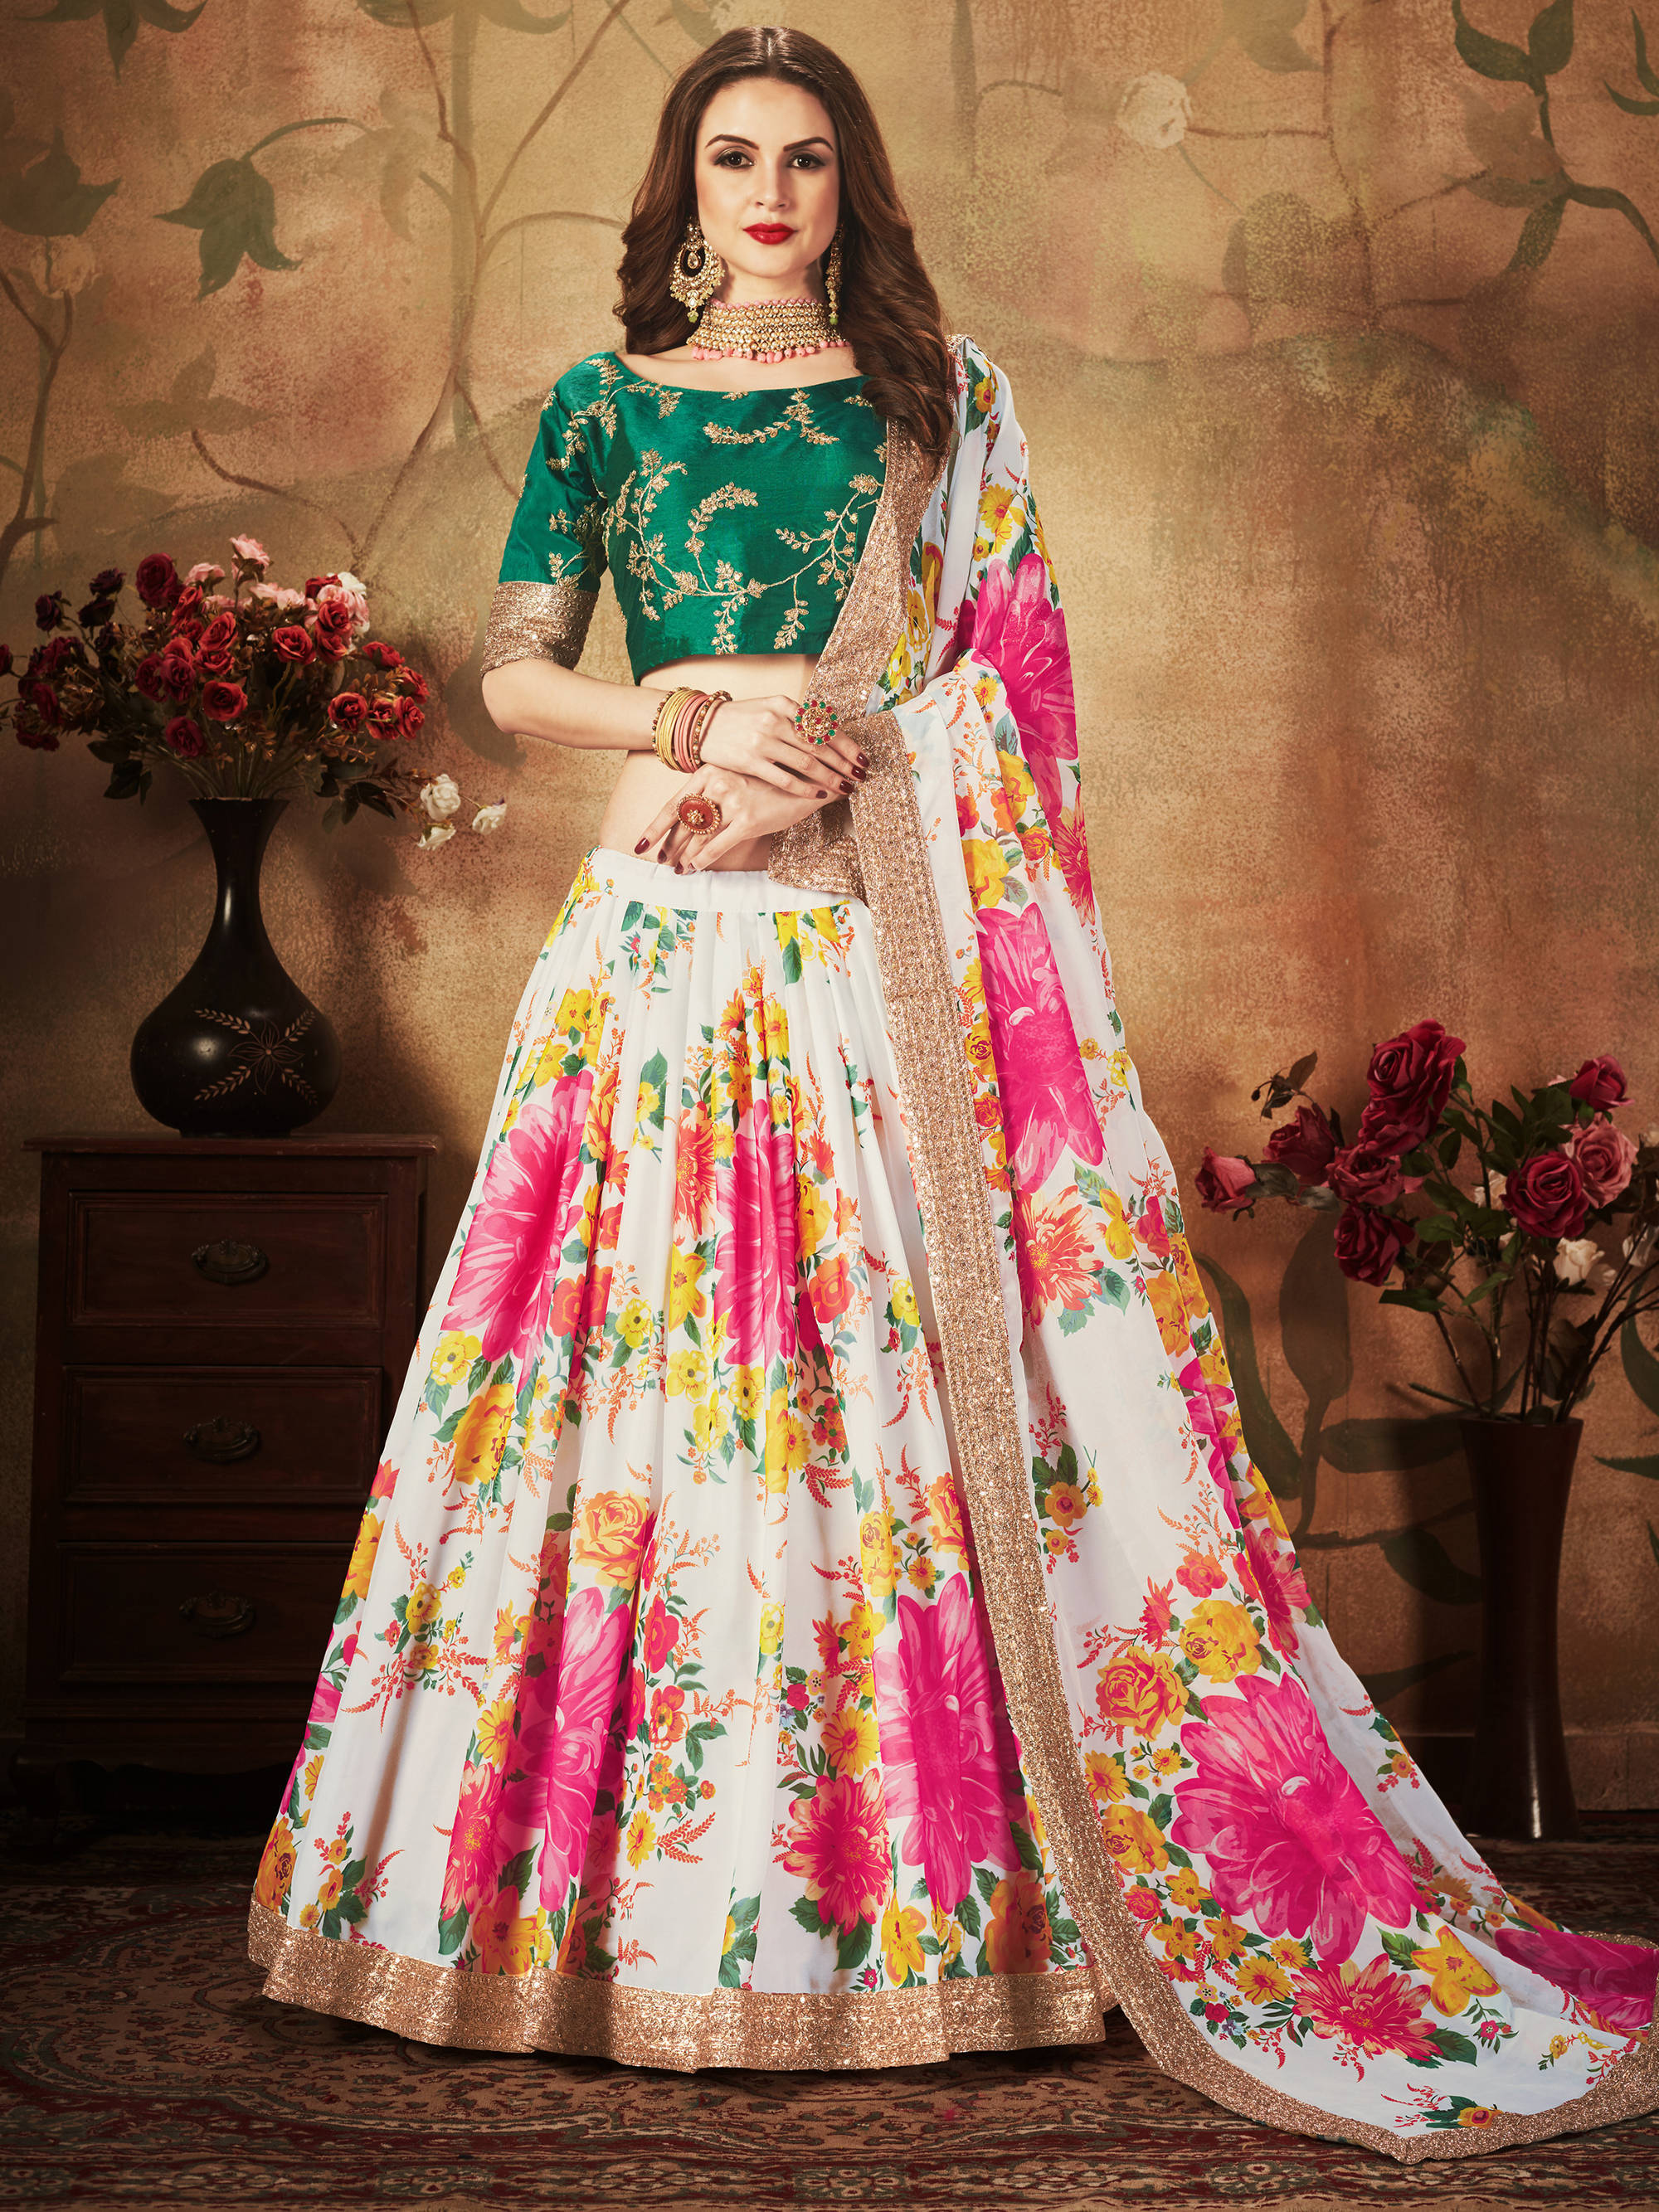 15 New Models of Floral Lehenga Choli For All Occasions